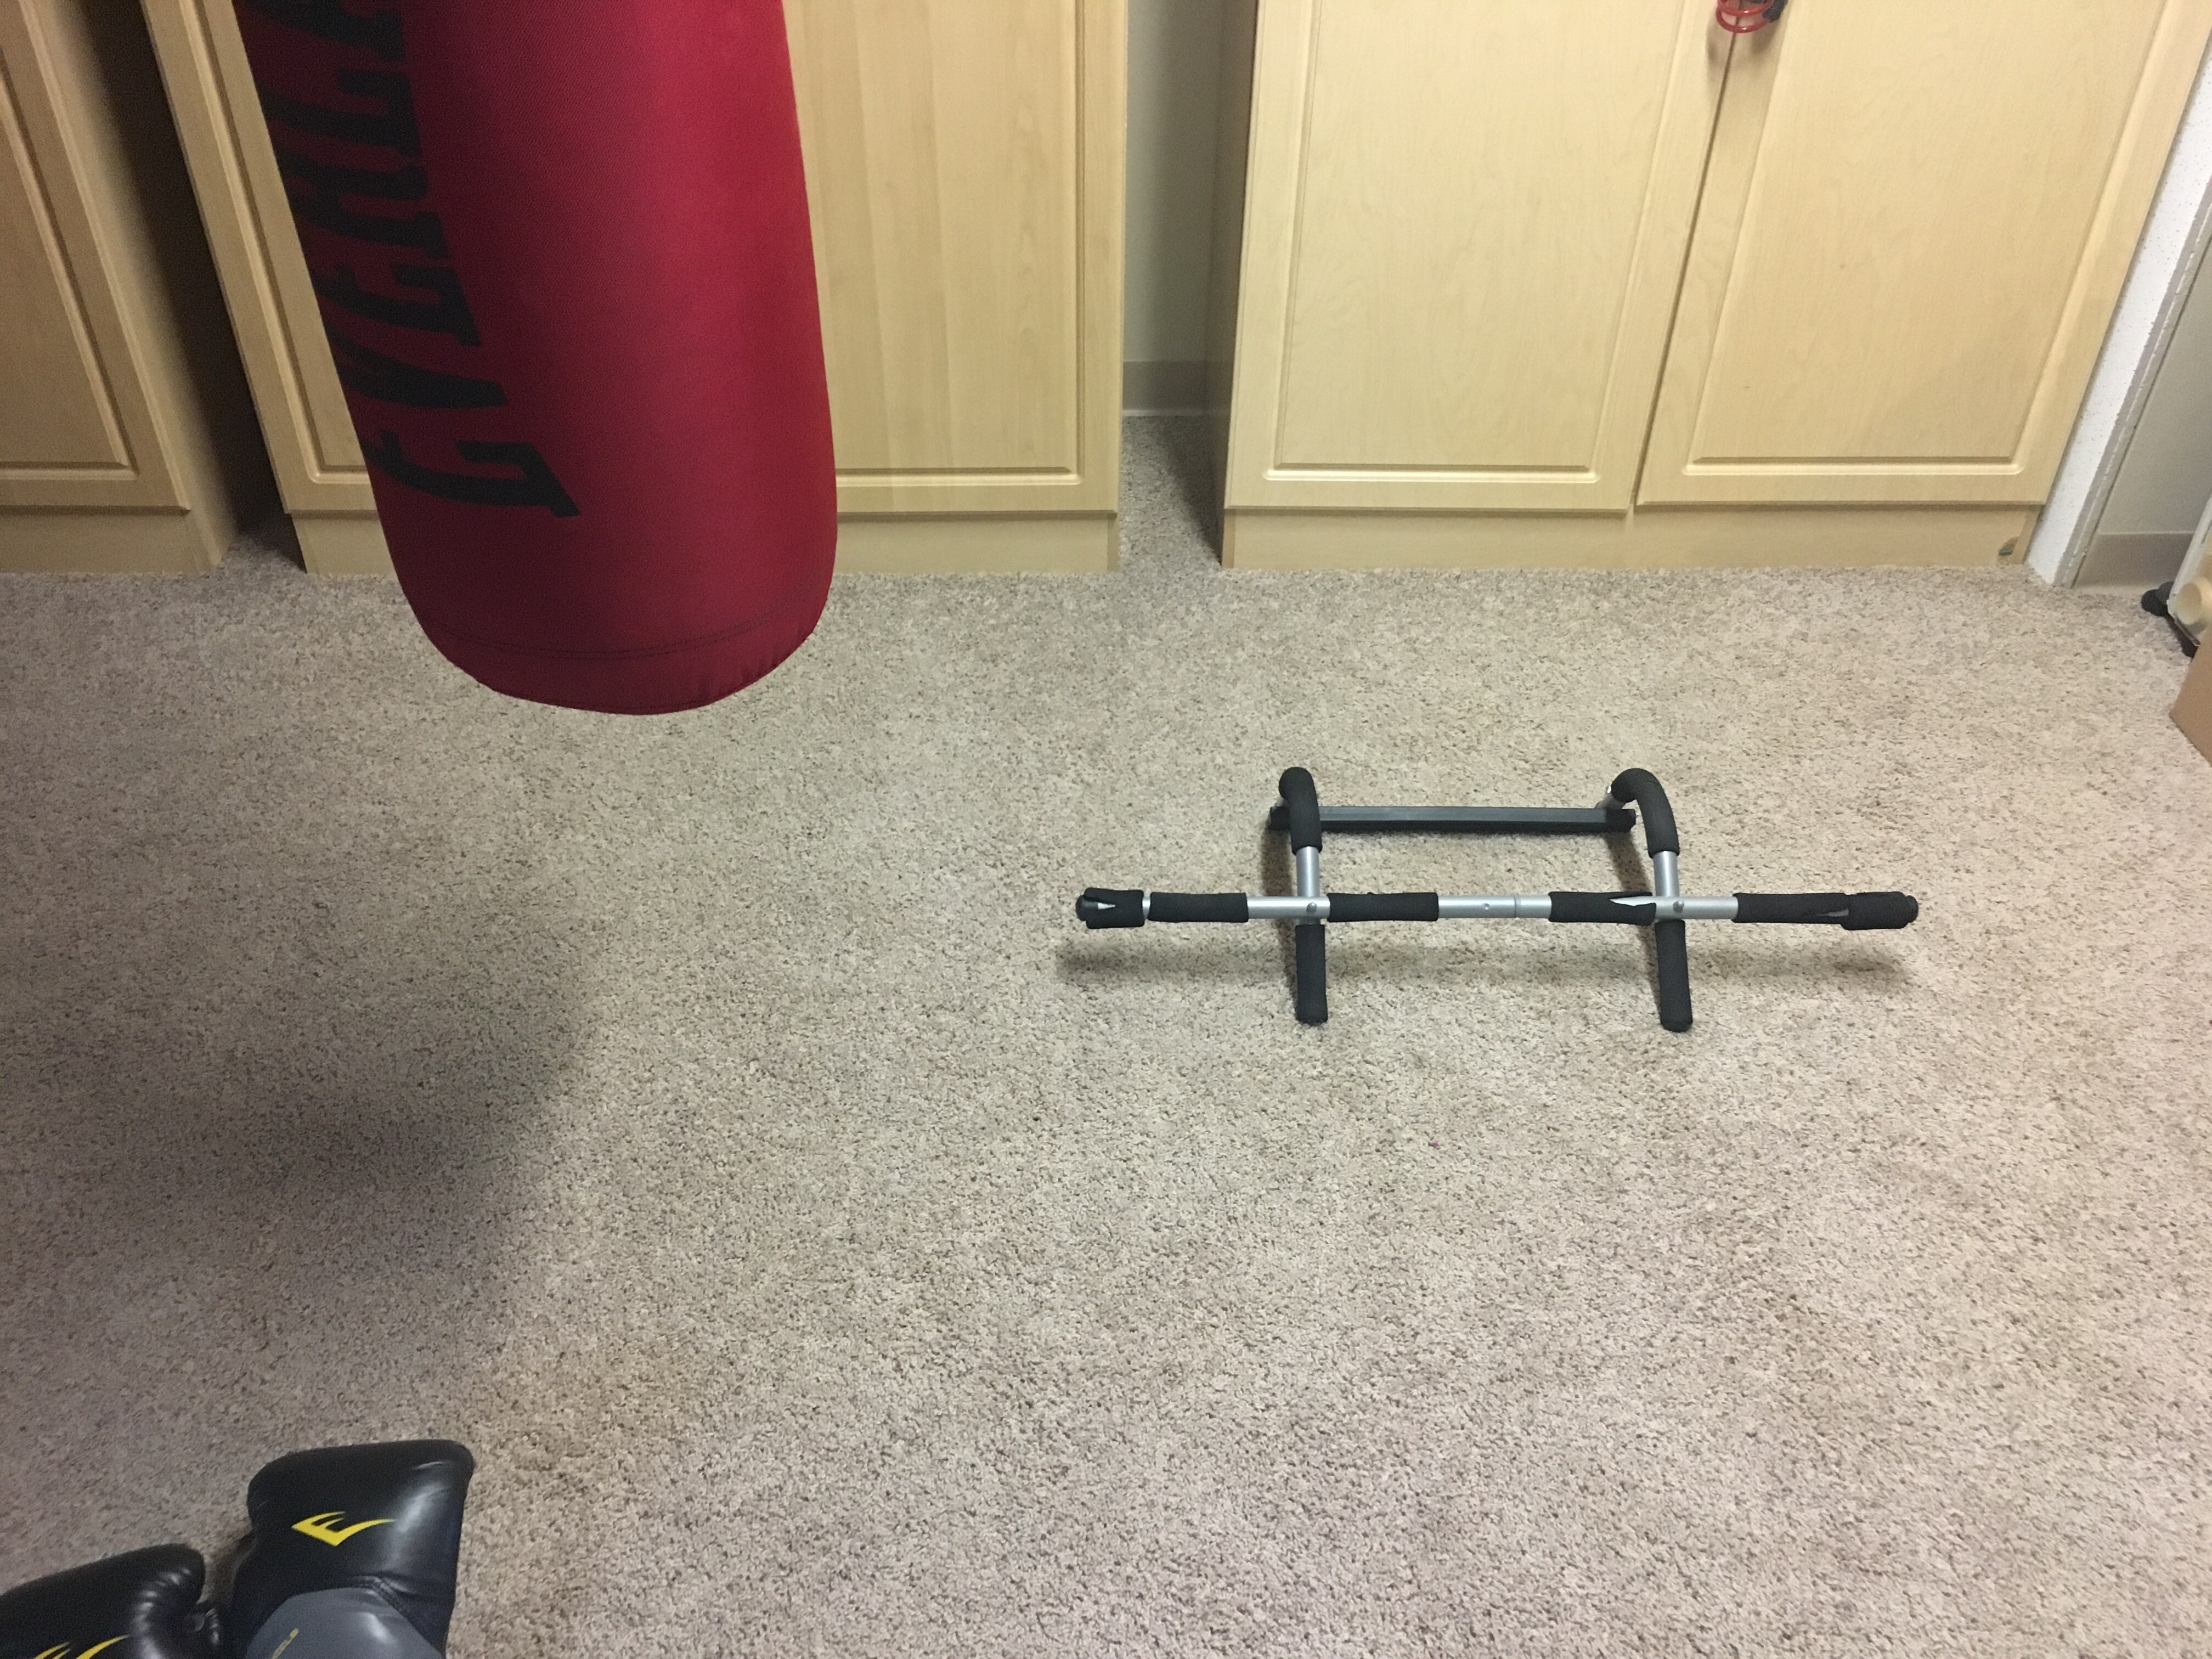 Iron gym workout bar in the push-up position